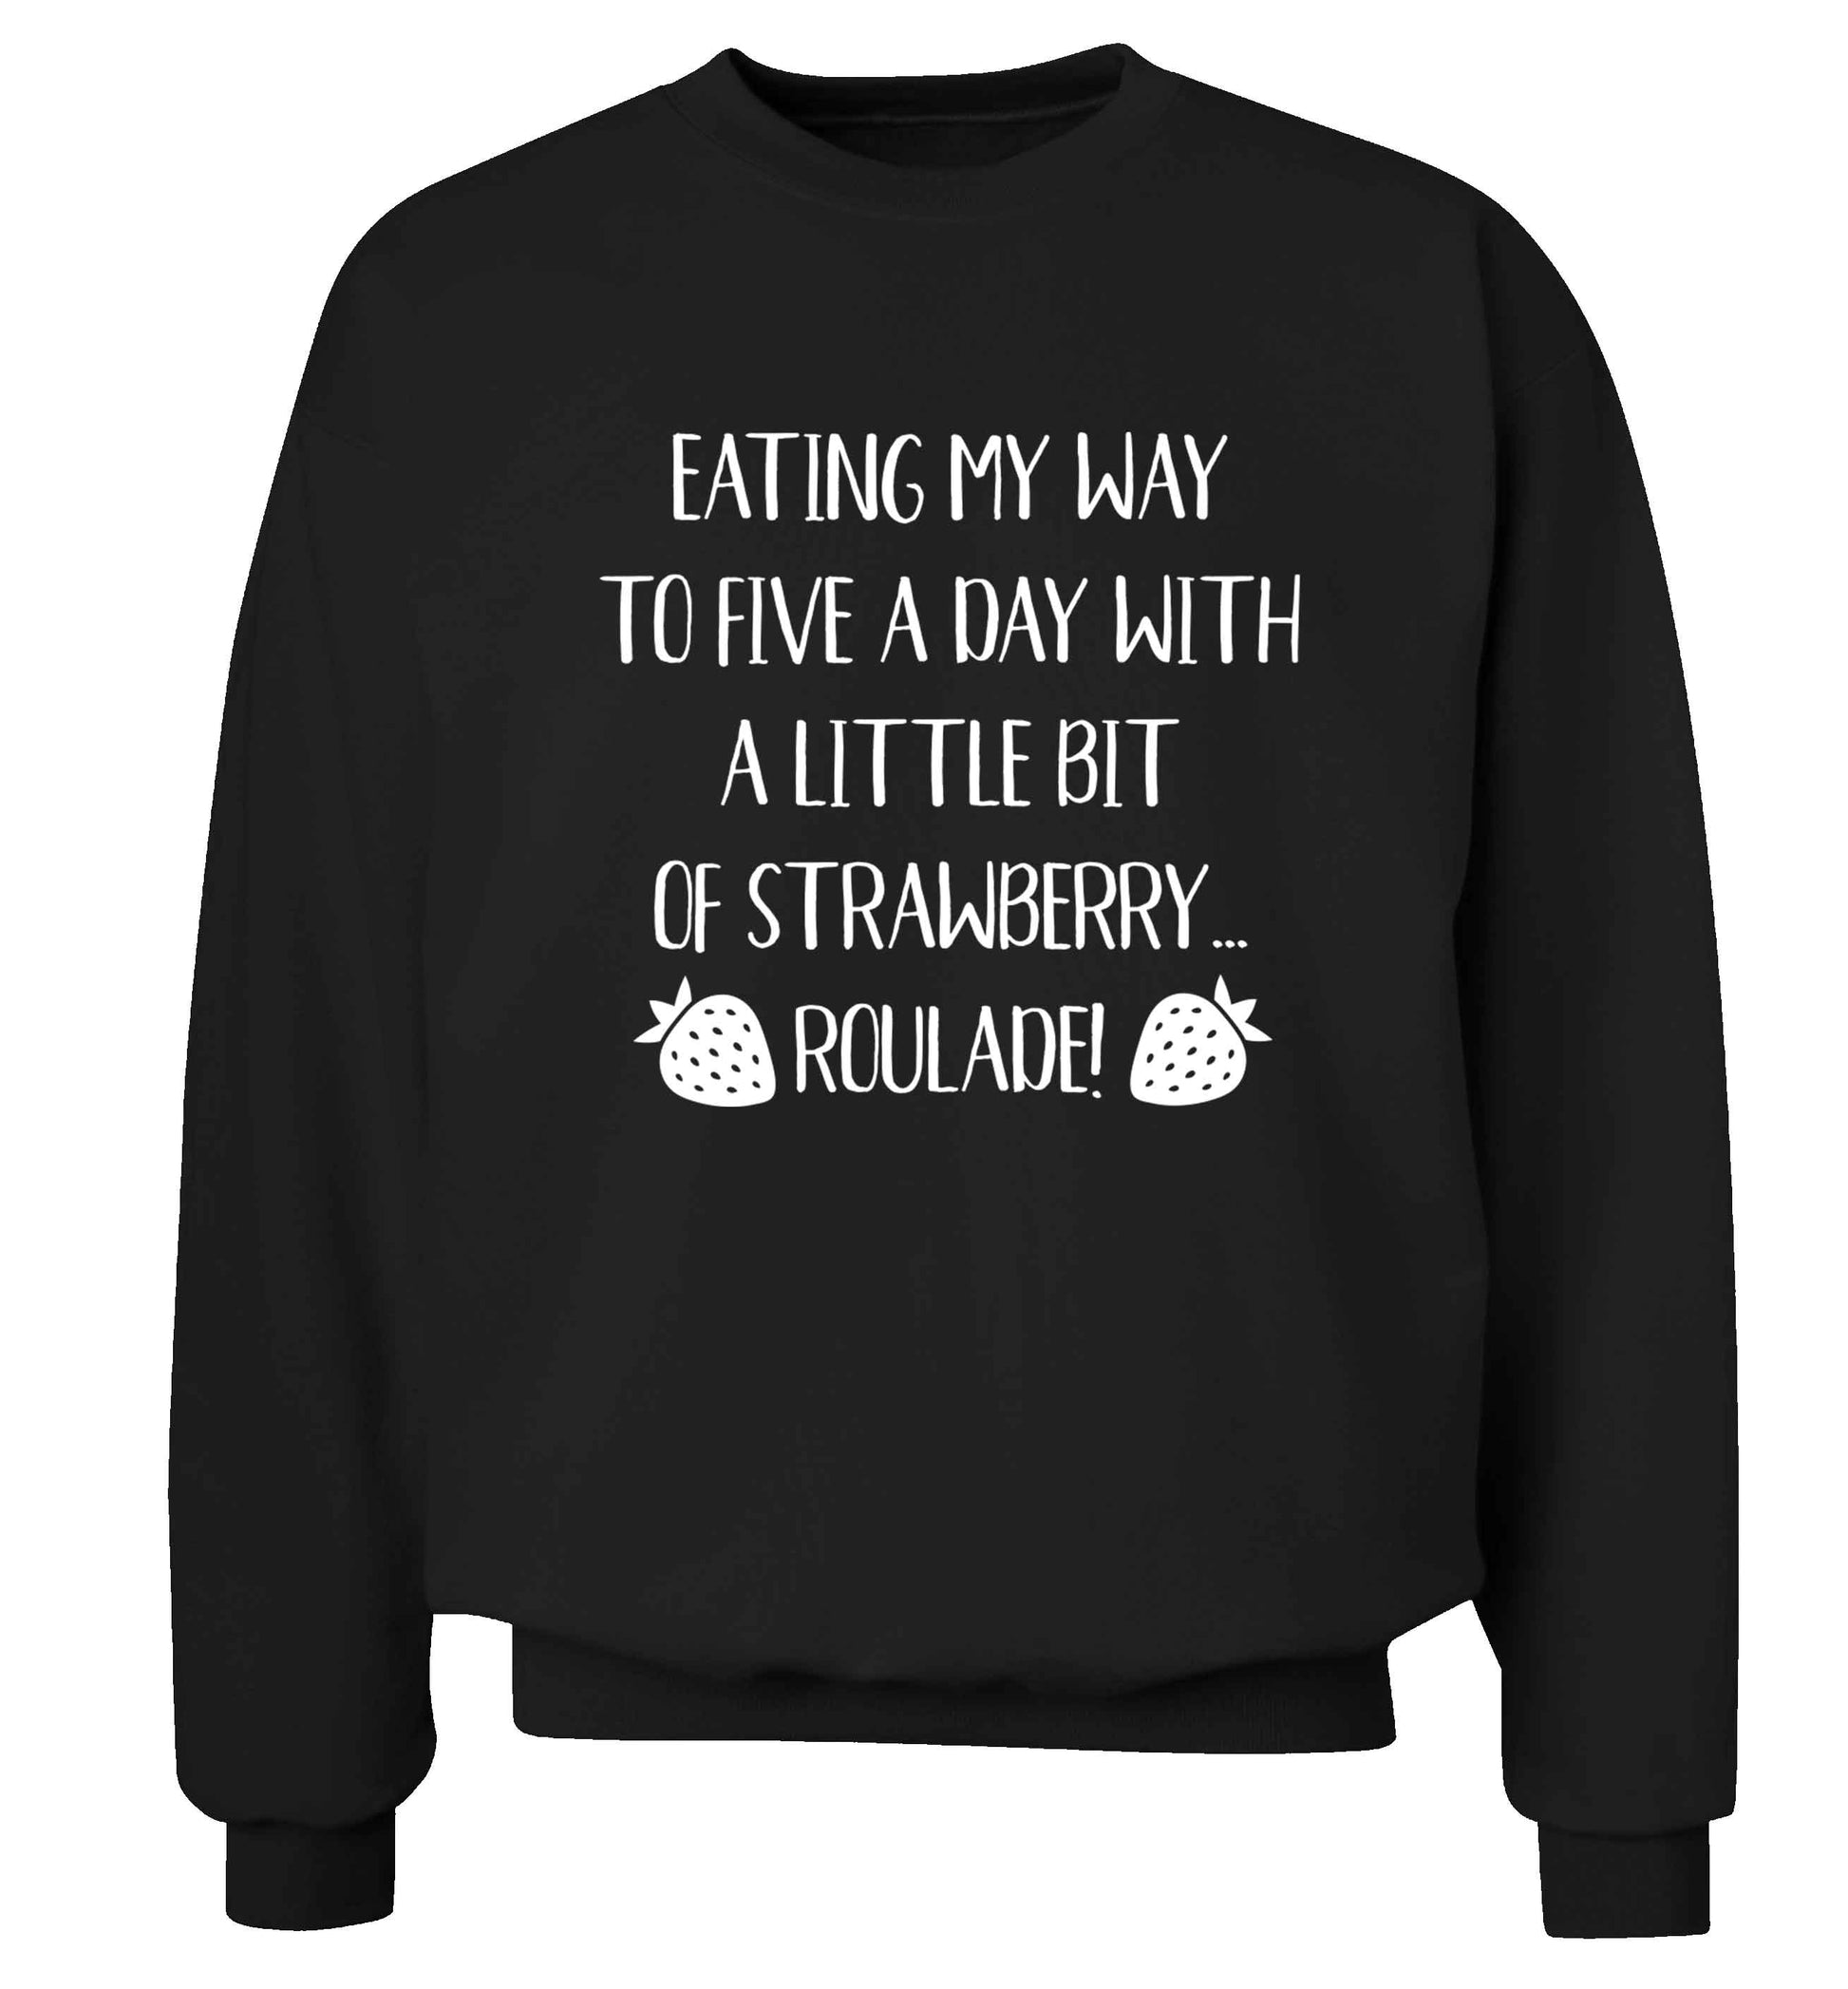 Eating my way to five a day with a little bit of strawberry roulade Adult's unisex black Sweater 2XL